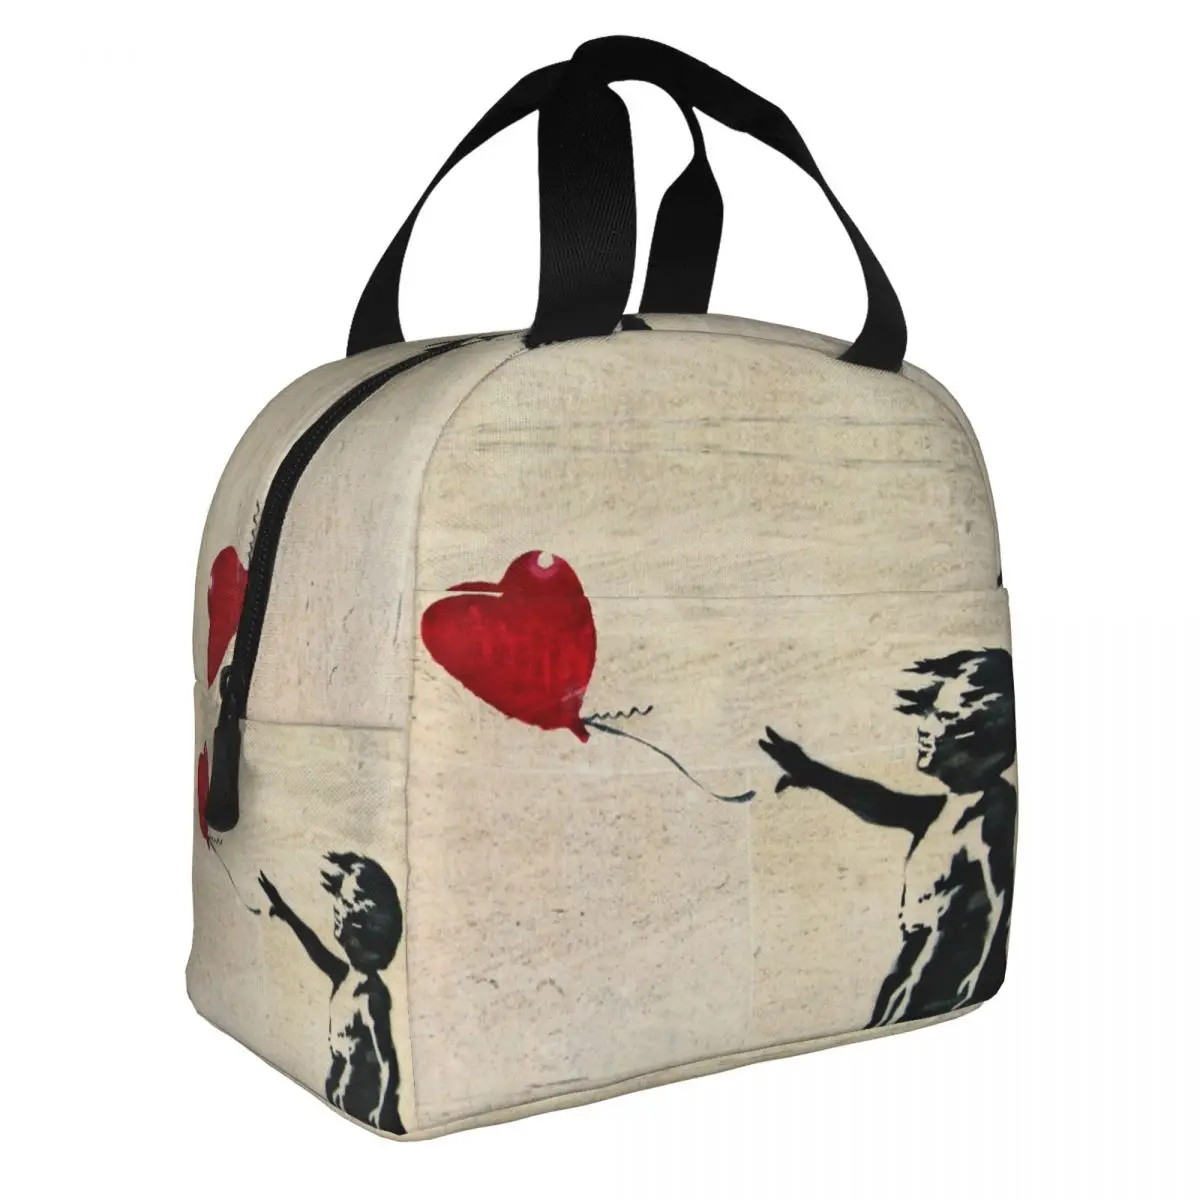 

Banksy's Girl With A Red Balloon Insulated Lunch Bag Portable Banksy World Peace Lunch Container Thermal Bag Tote Lunch Box